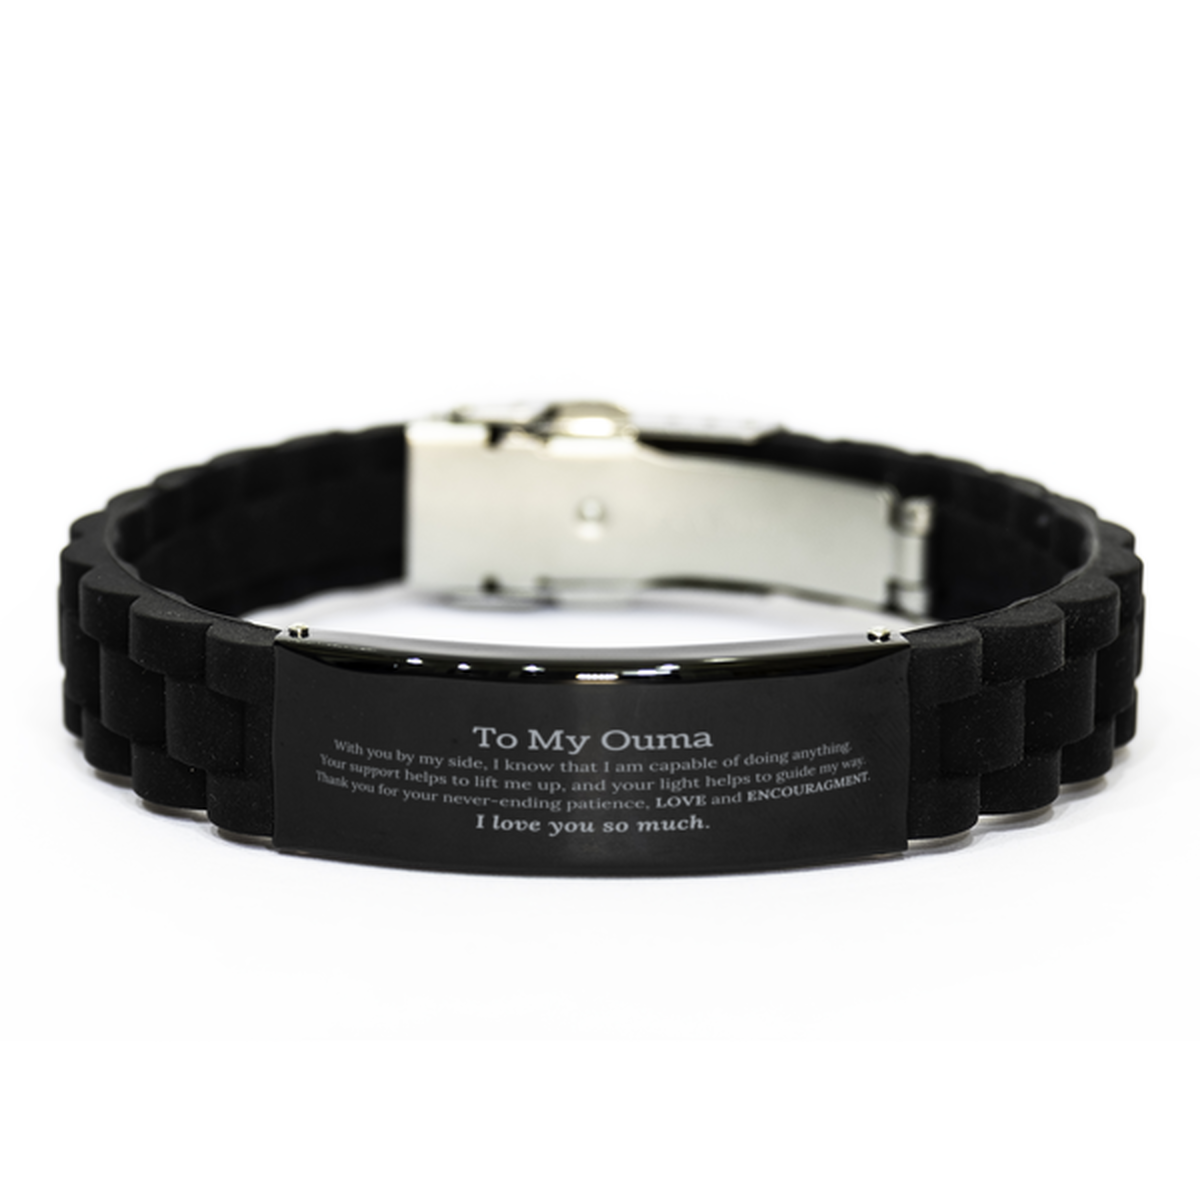 Appreciation Ouma Black Glidelock Clasp Bracelet Gifts, To My Ouma Birthday Christmas Wedding Keepsake Gifts for Ouma With you by my side, I know that I am capable of doing anything. I love you so much